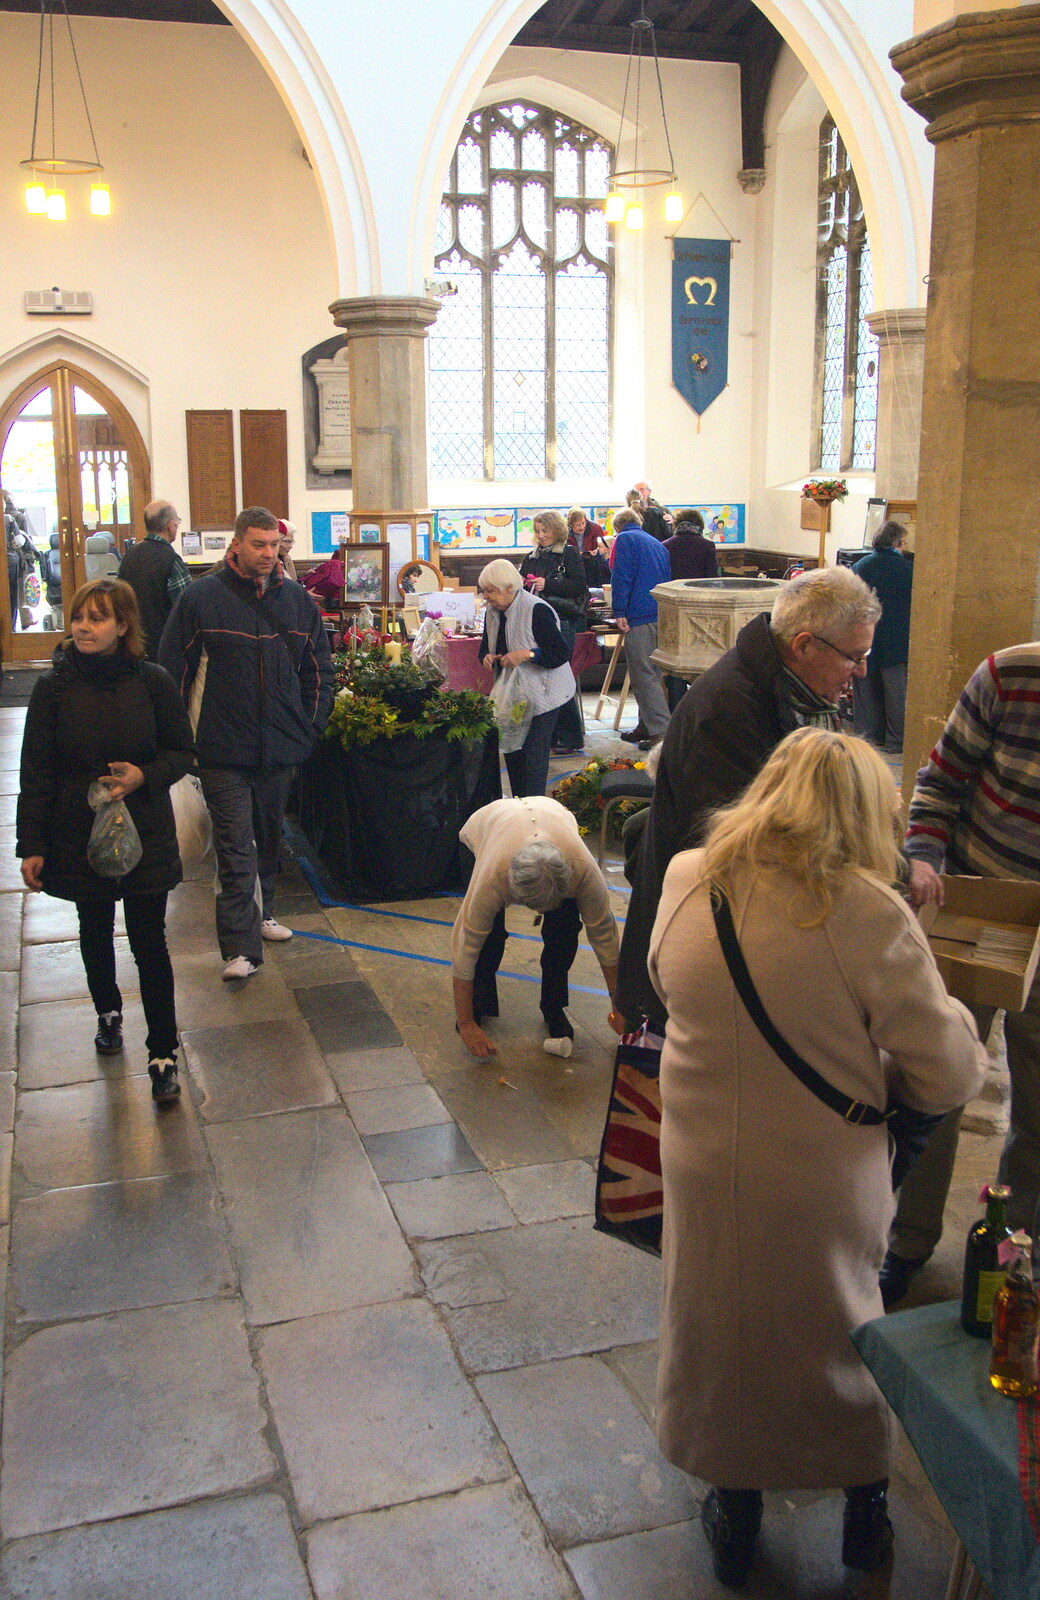 More craft stalls from A Christmas Fair at St. Mary's Church, Diss, Norfolk - 24th November 2012